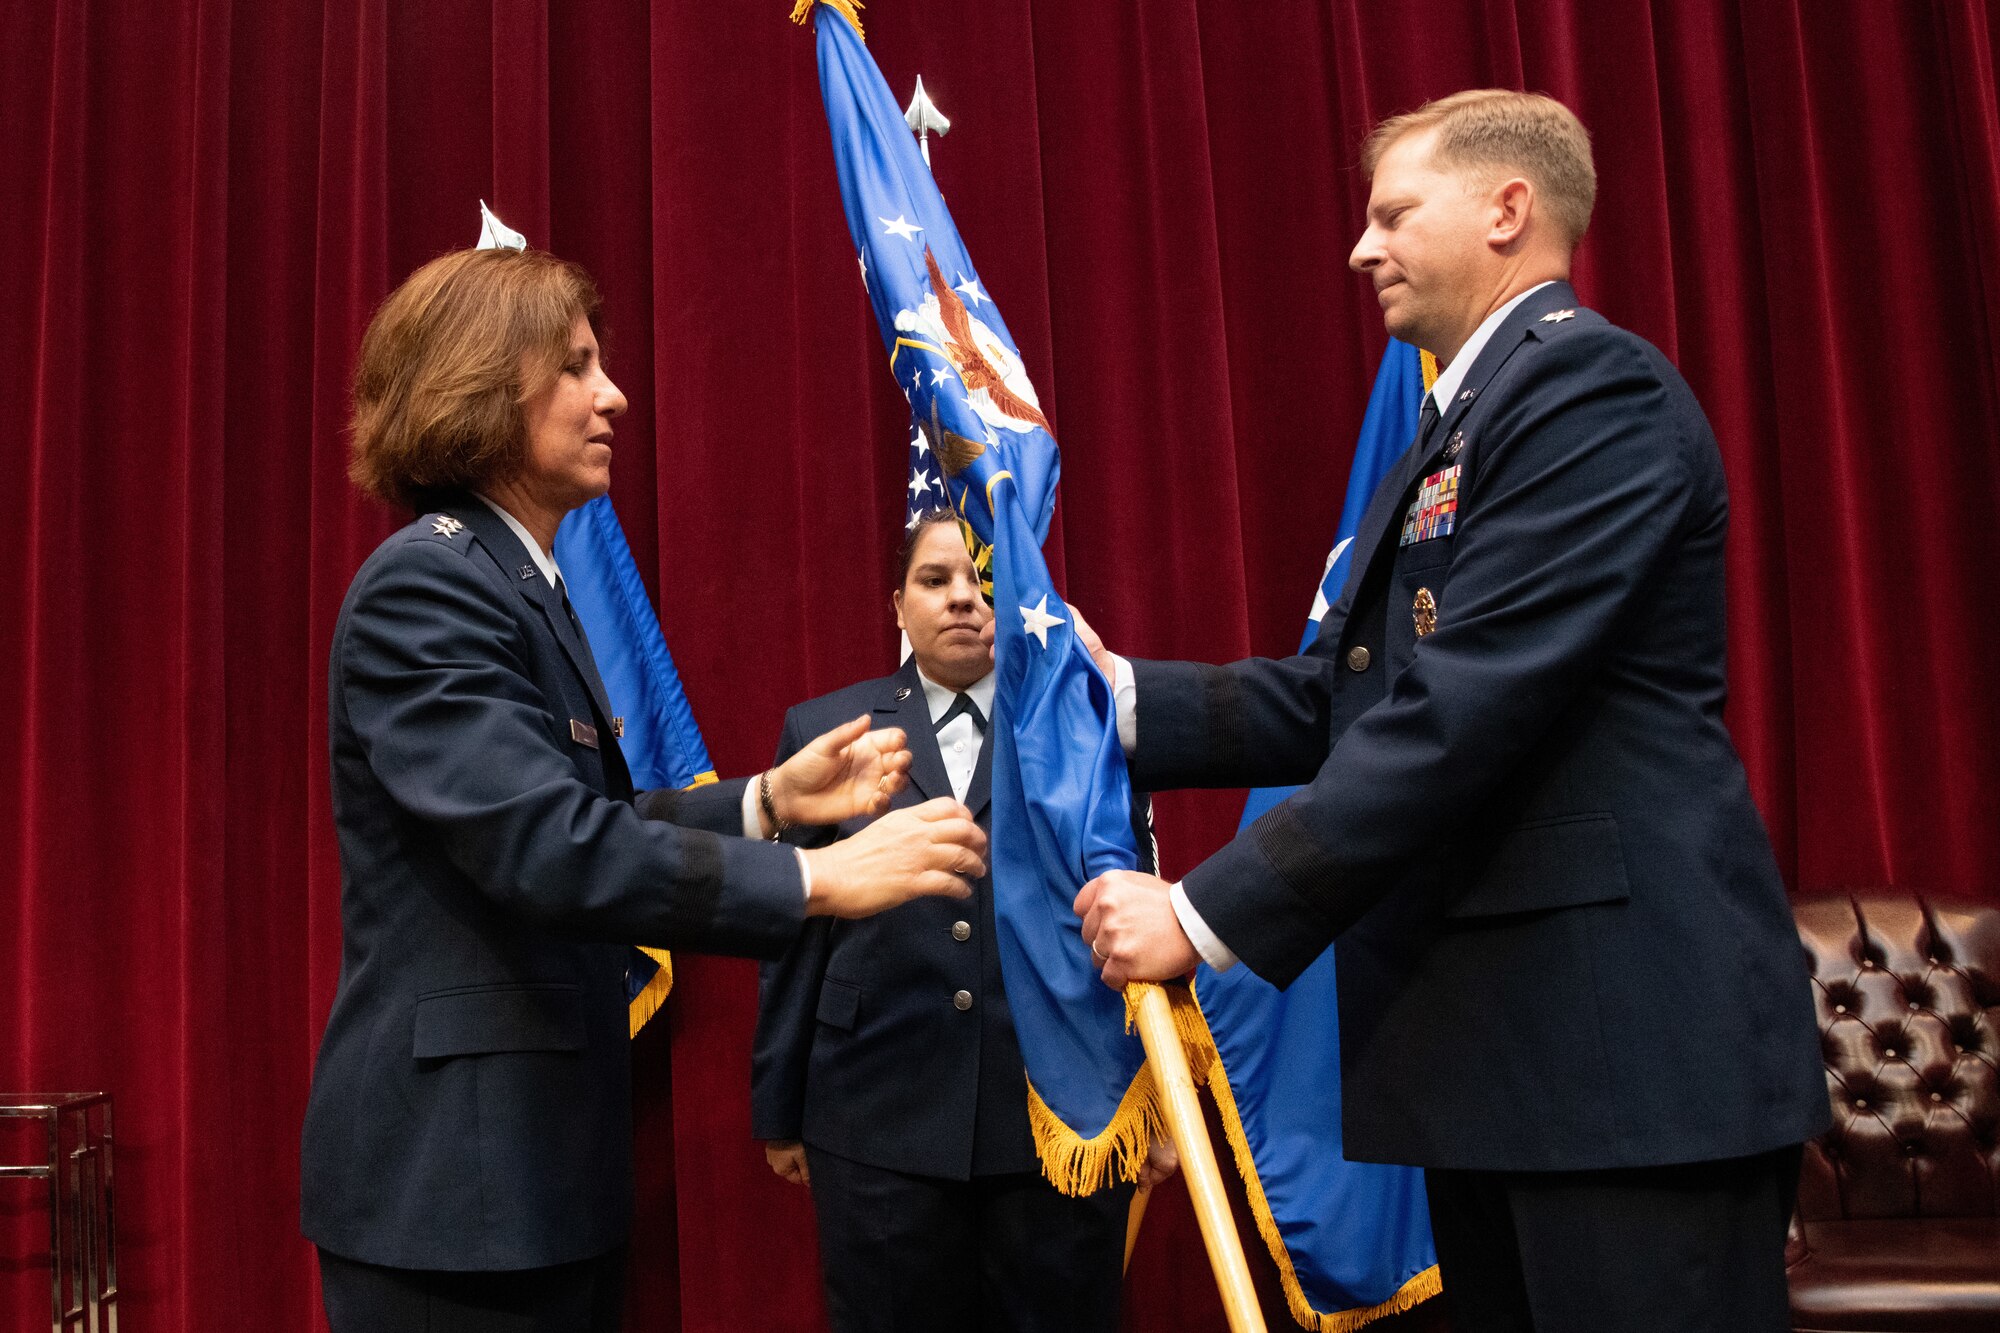 Major Gen. Parker H. Wright took command of the Curtis E. LeMay Center for Doctrine Development and Education and the position of deputy commander of Air University during a change of command ceremony held July 21, 2023.